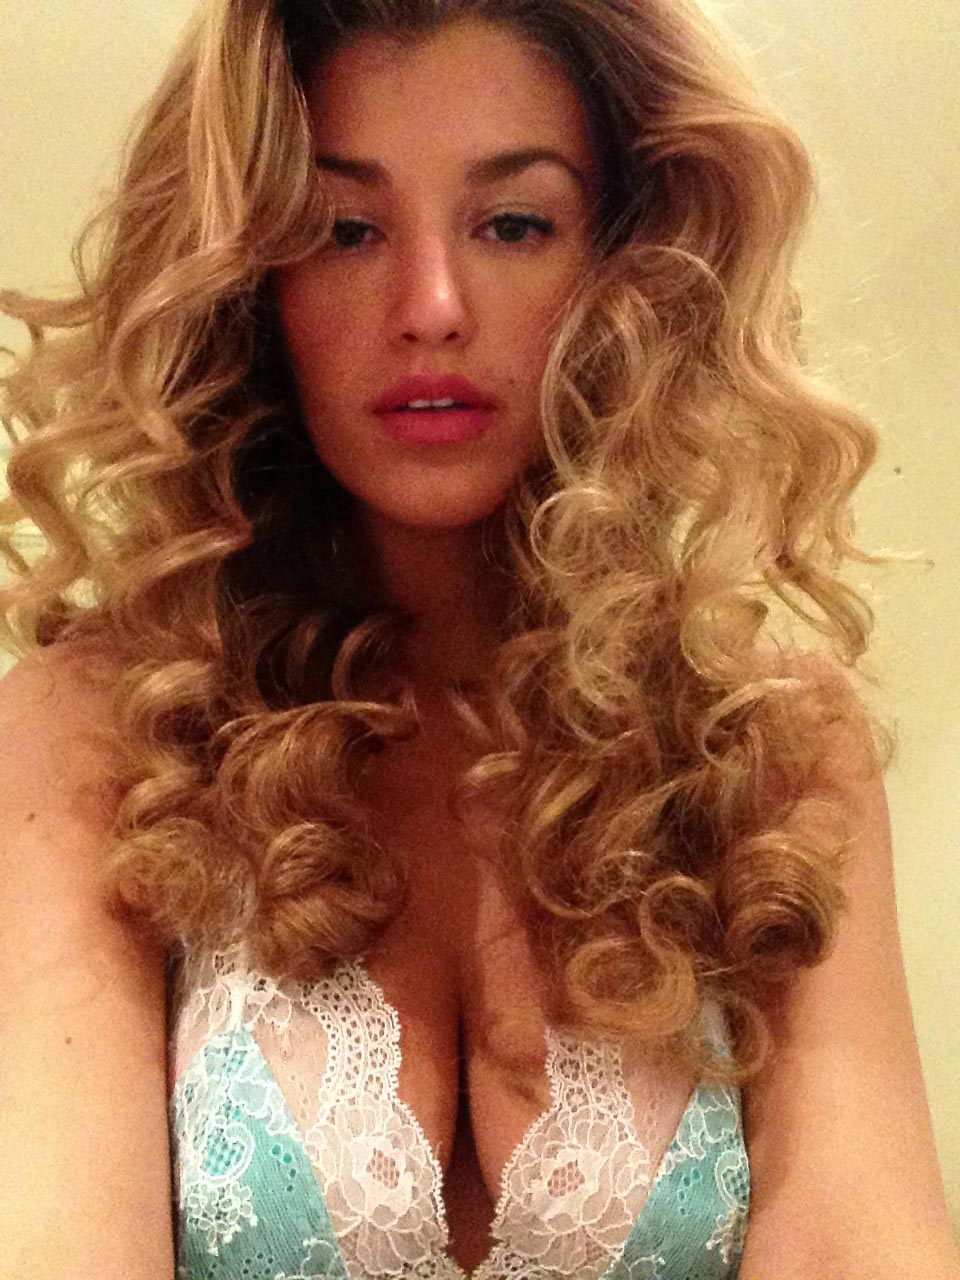 Amy Willerton Nude Big Pussy Lips — Leaked Private Pics